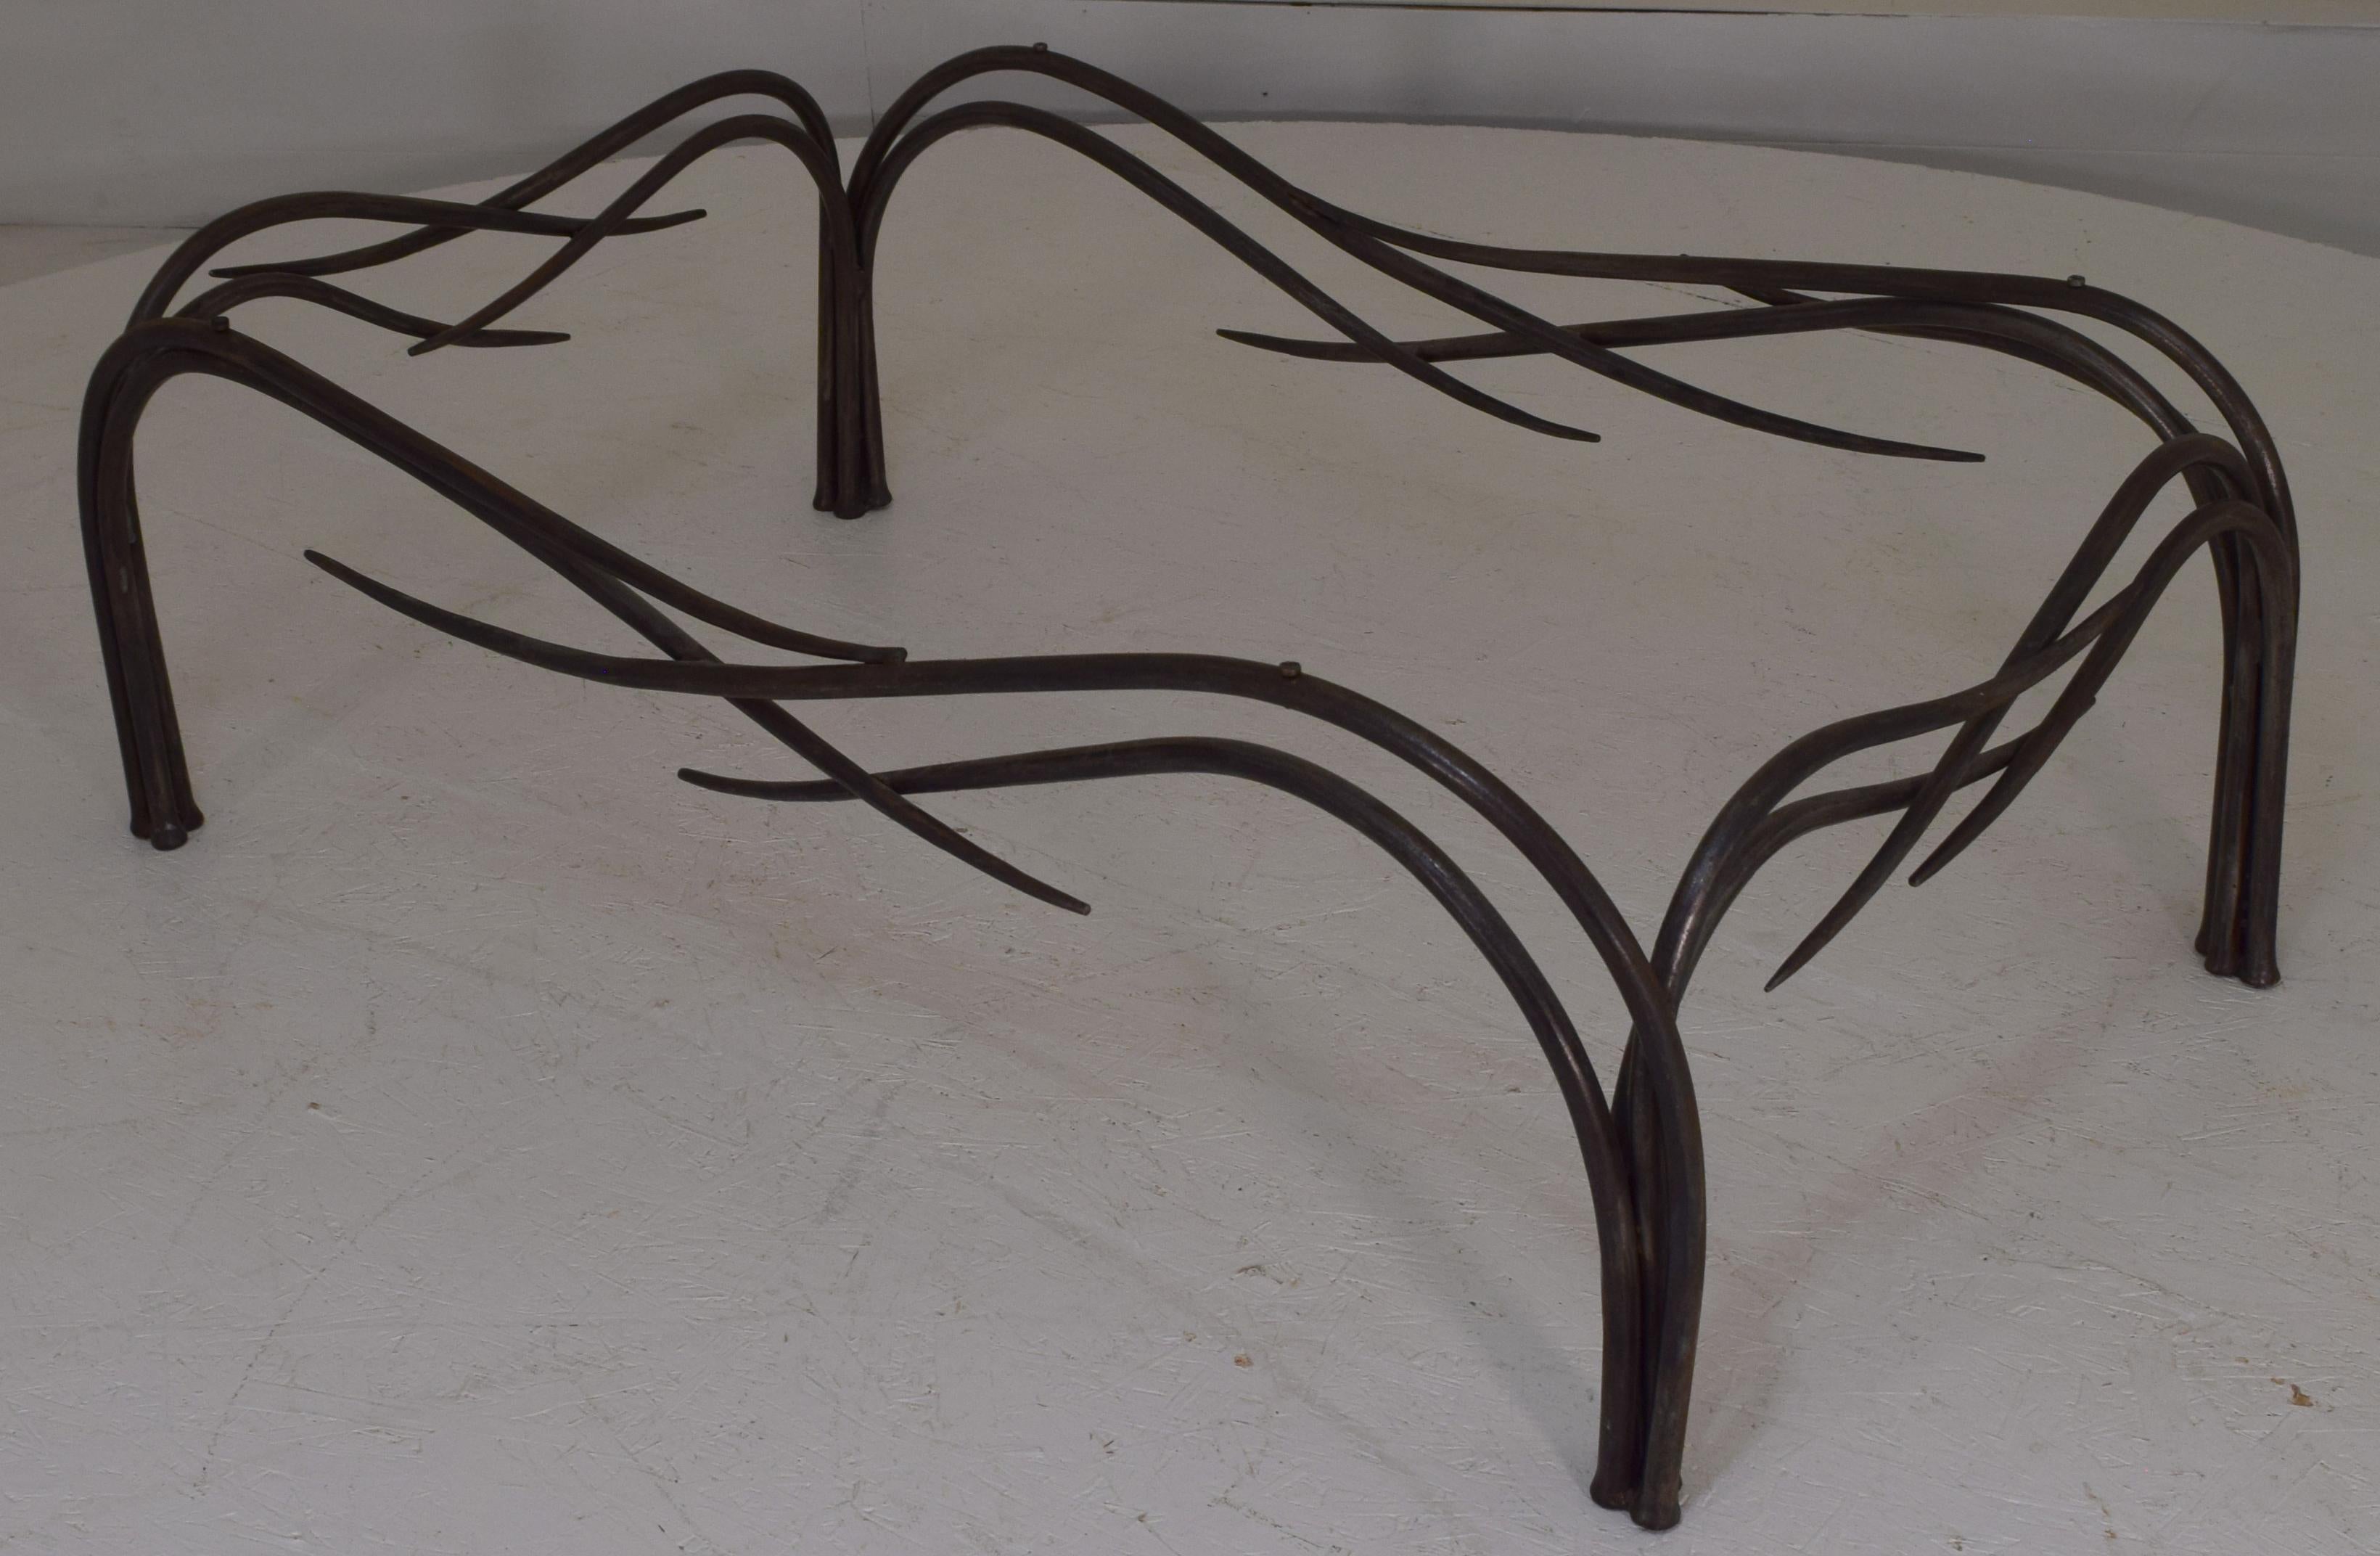 Commissioned from Jeff Fetty in 1994, this wrought iron table is known as 